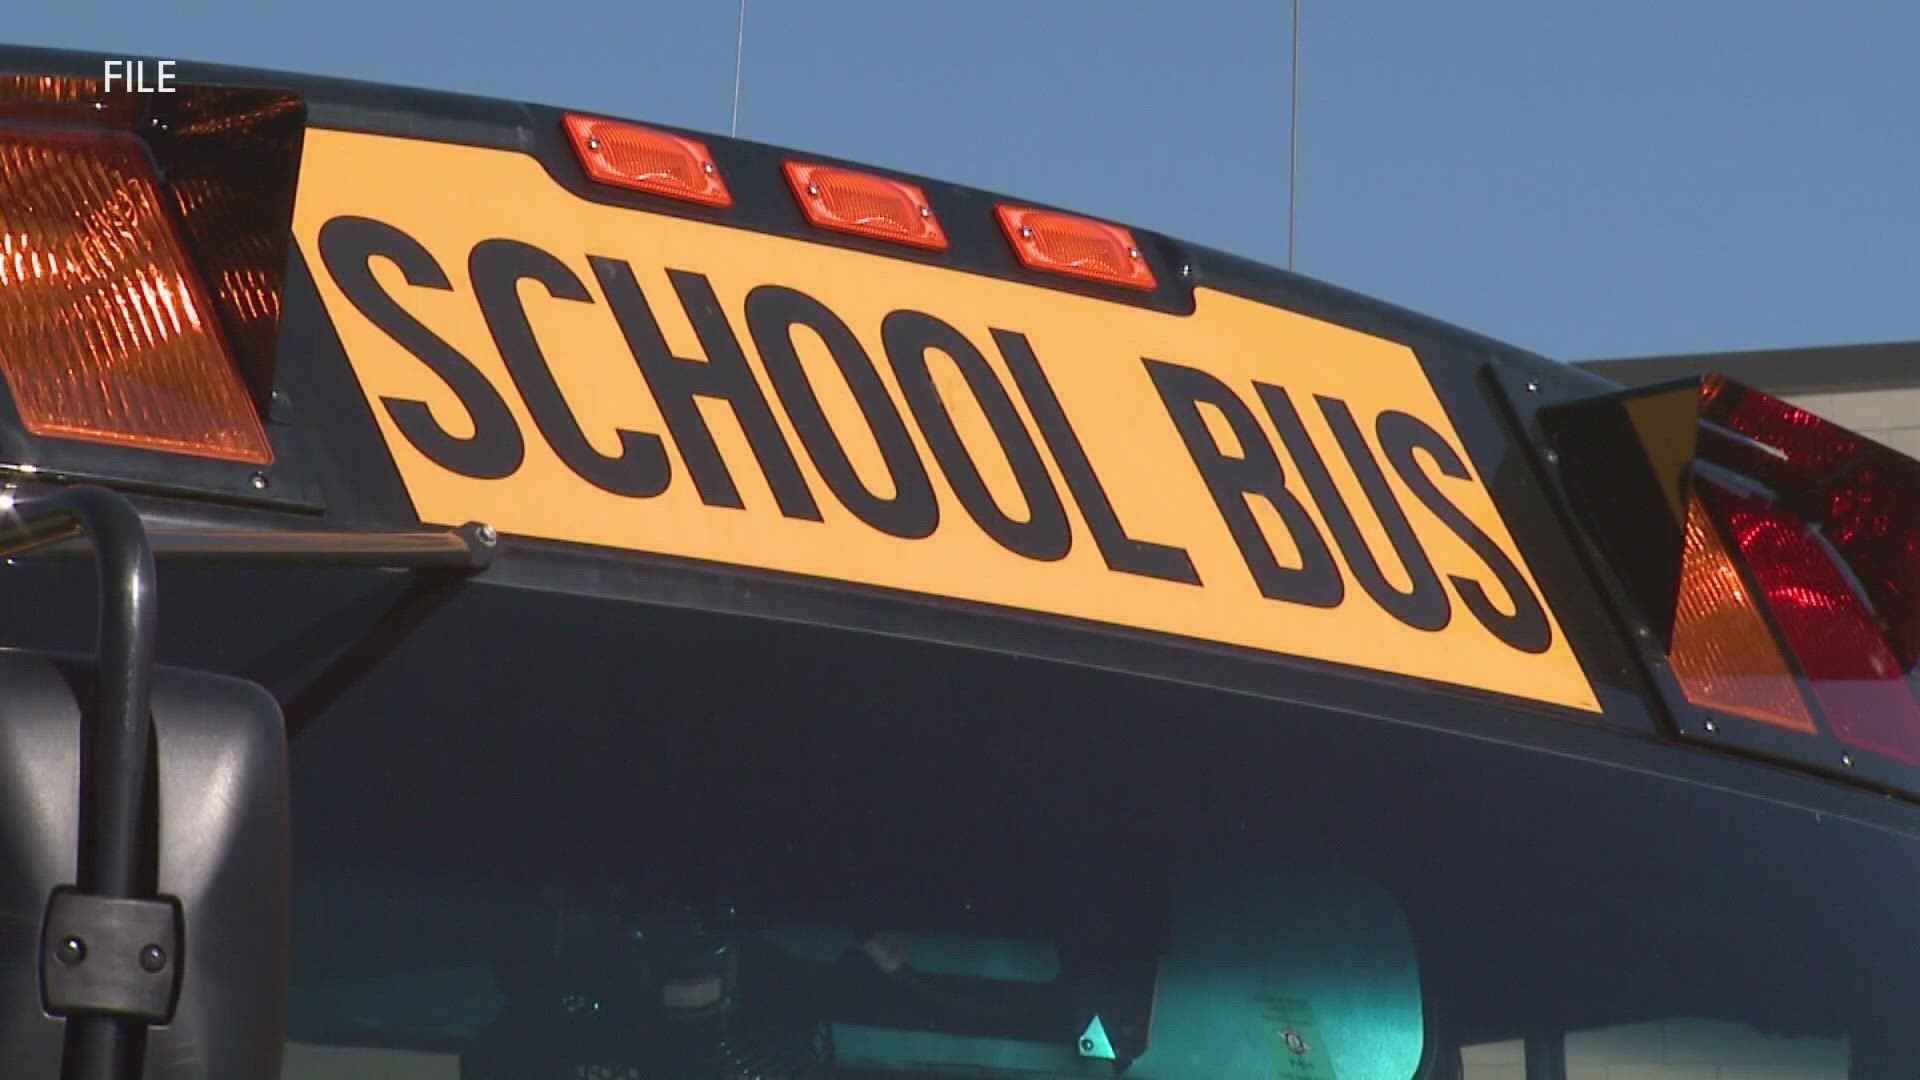 A new Michigan law allows officers to use video from stop-arm cameras on school buses to issue citations to drivers who don't stop.